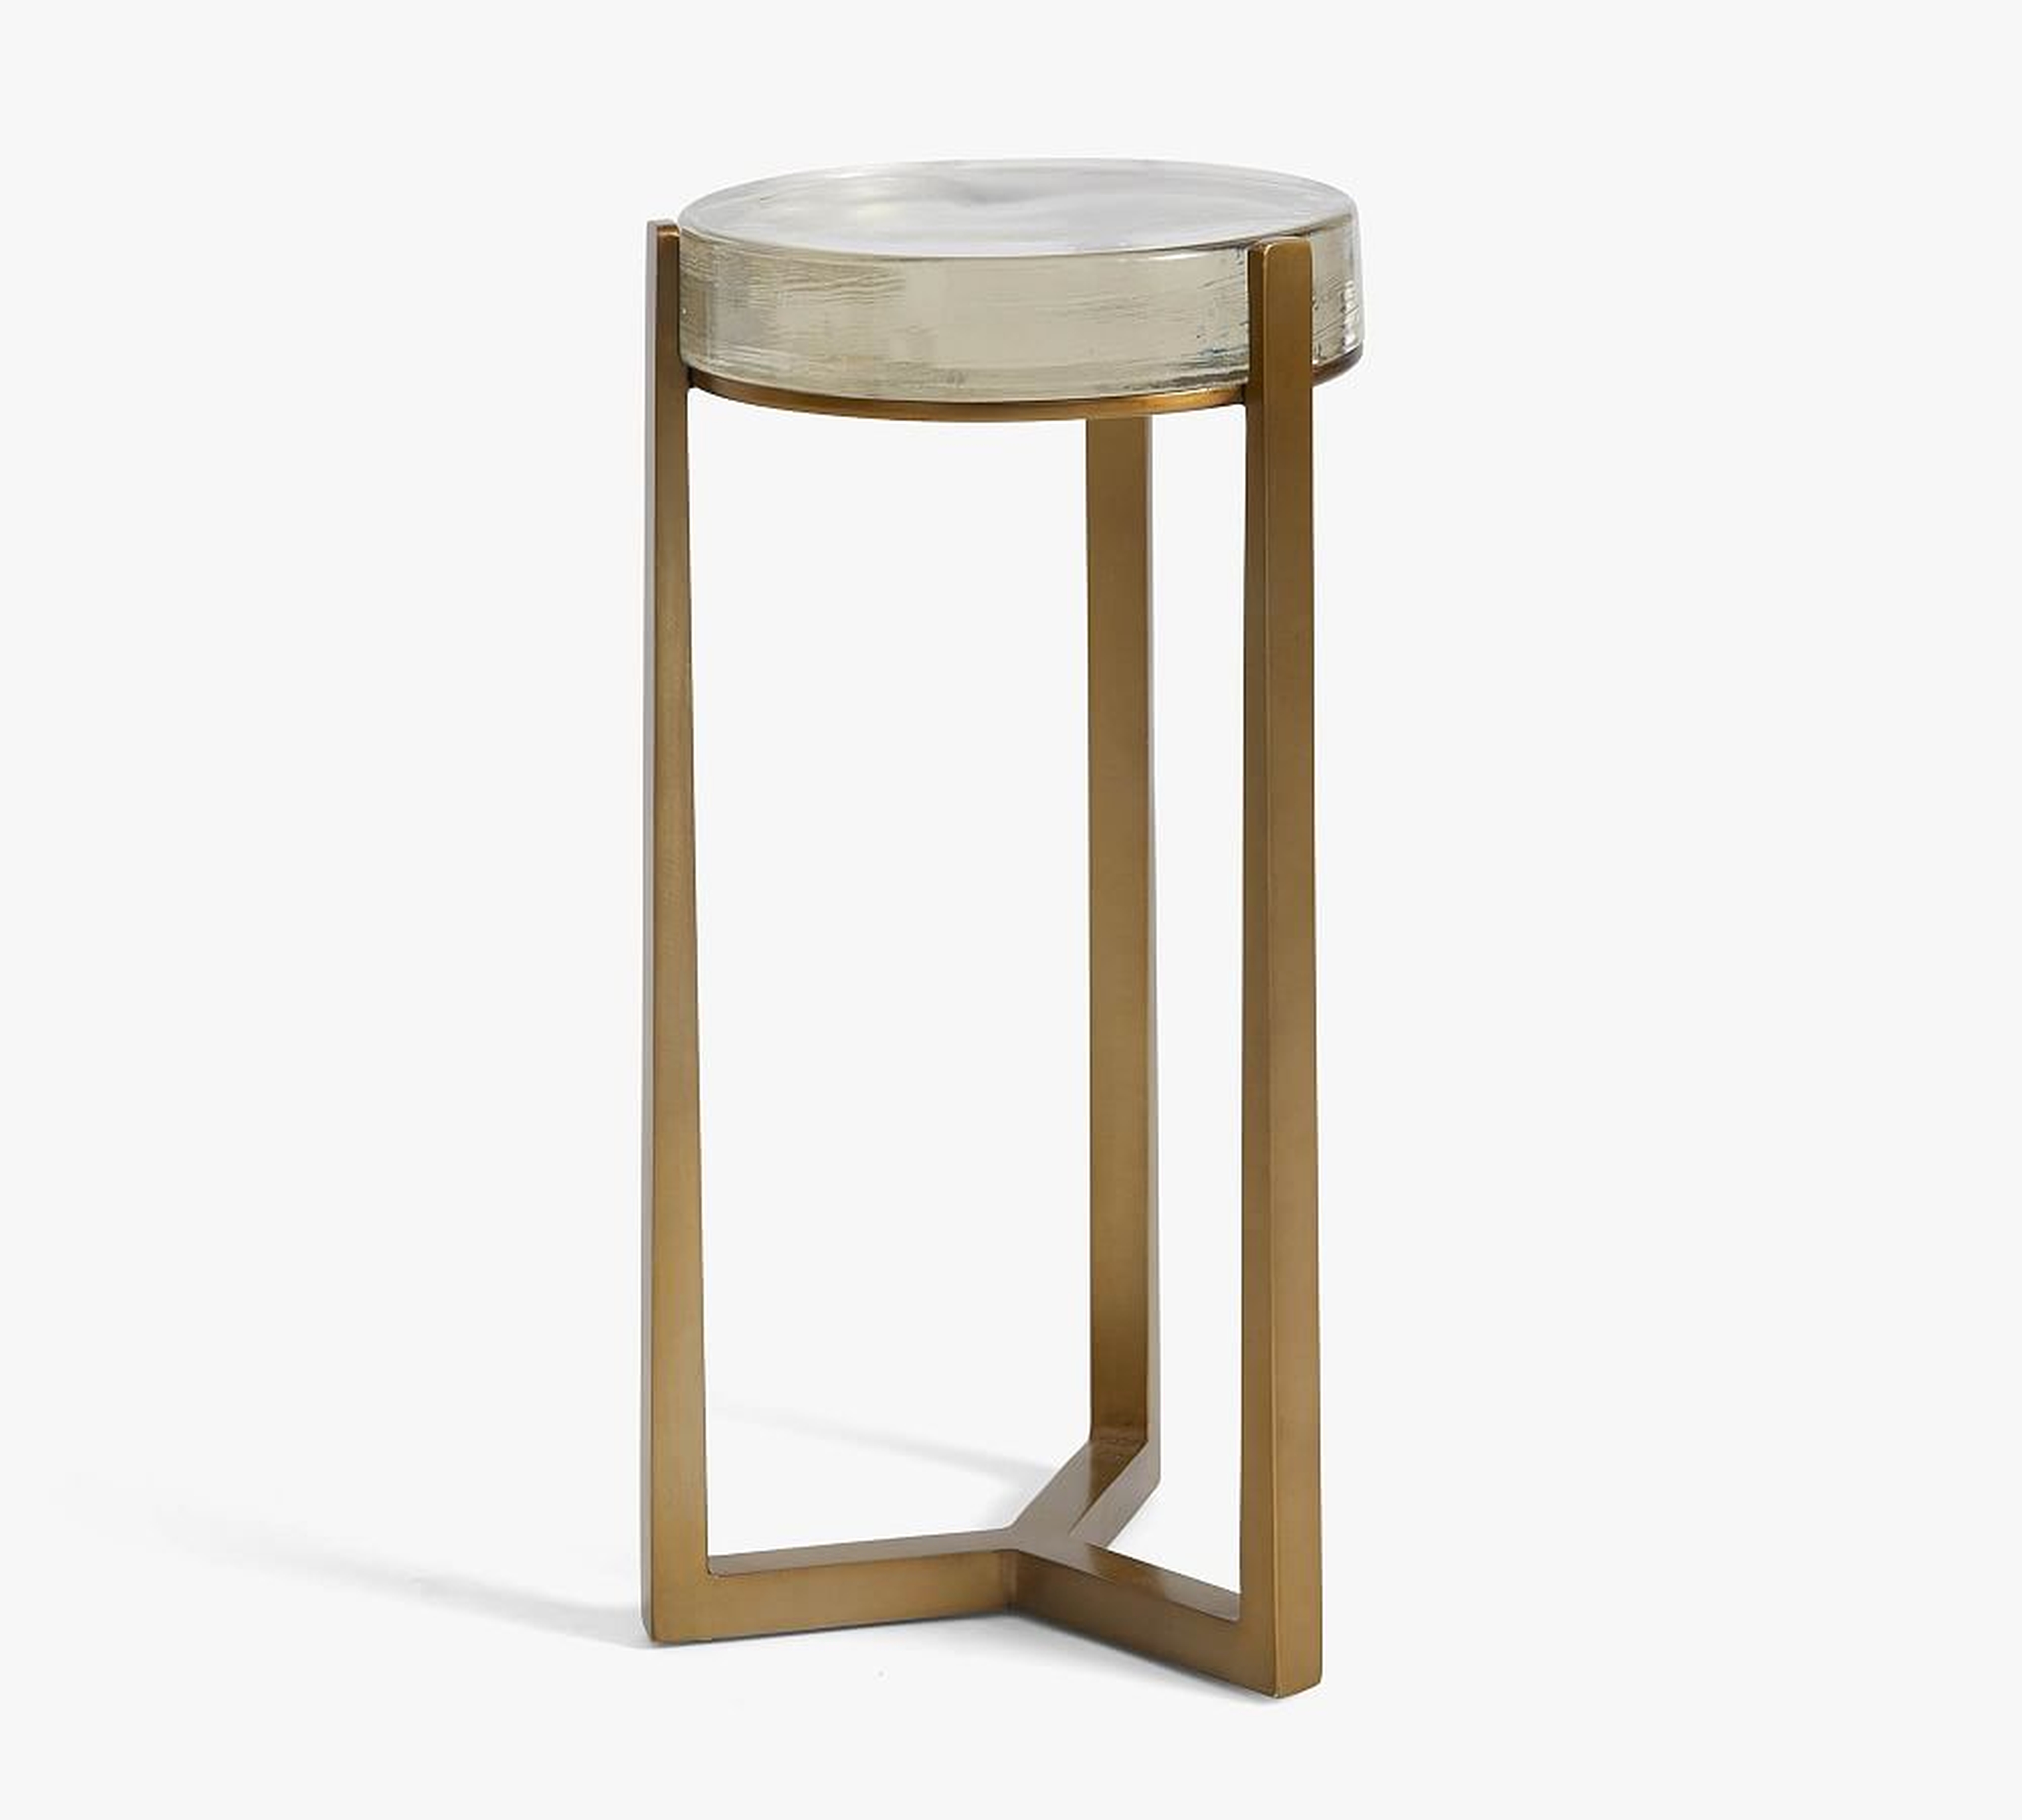 Cori 10" Round Accent Table, Recycled Clear Glass Top/Brass Base - Pottery Barn